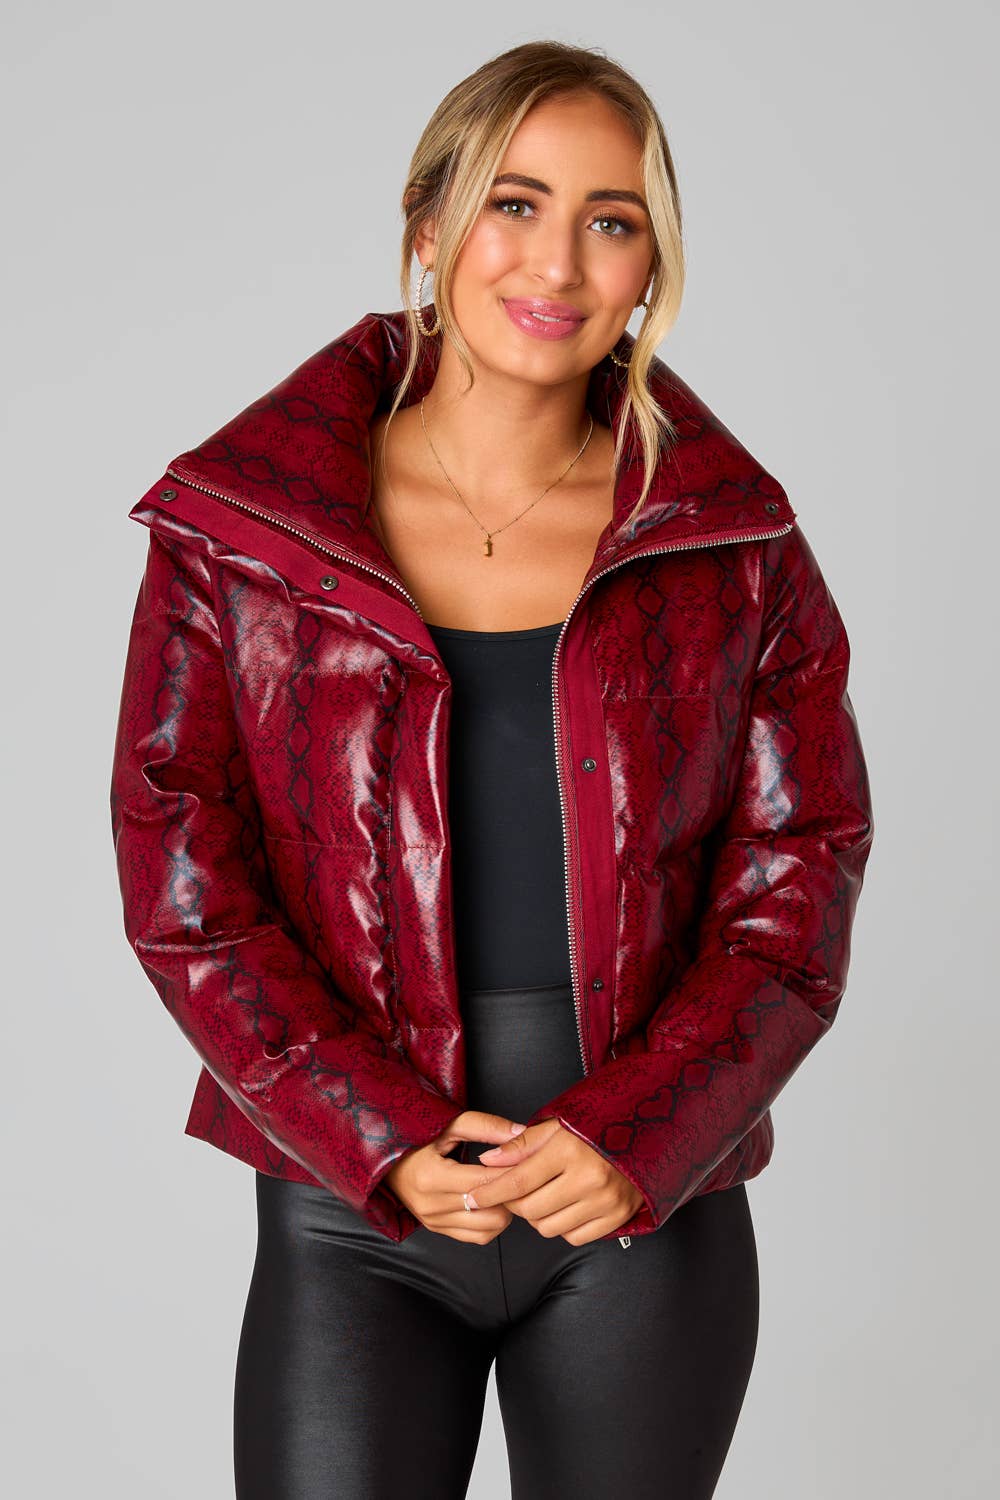 Addison Red Snake Puffer Jacket: in red black